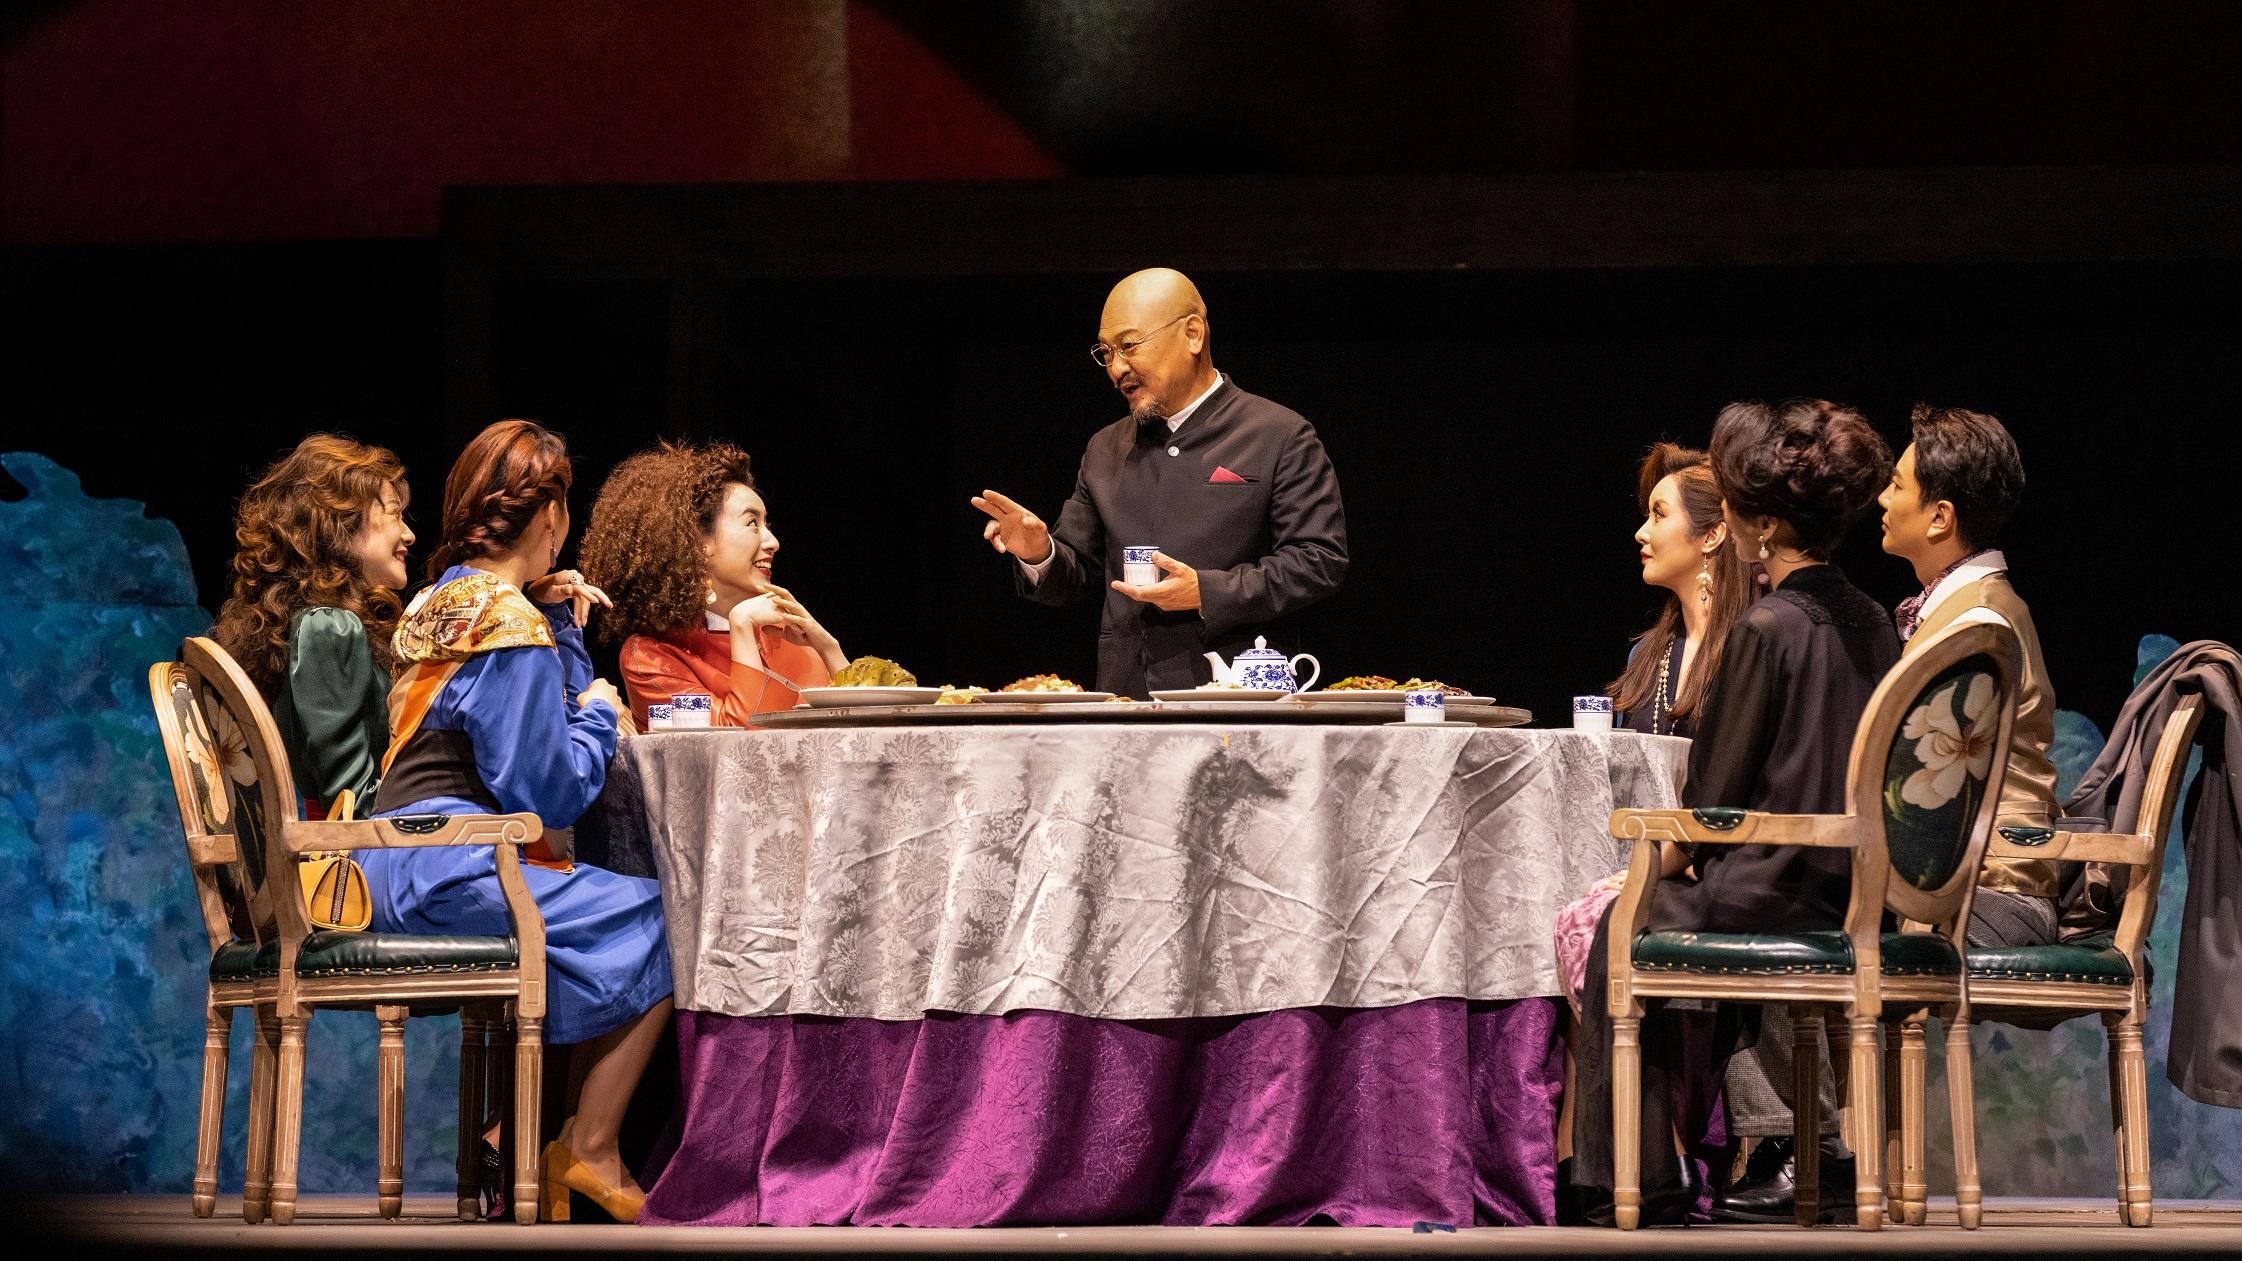 "Blossoms" (Part I), a theatre production in Shanghai dialect presented by the Leisure and Cultural Services Department, will make its debut in Hong Kong in late April at the Grand Theatre of the Hong Kong Cultural Centre. Photo shows a scene from "Blossoms" (Part I).